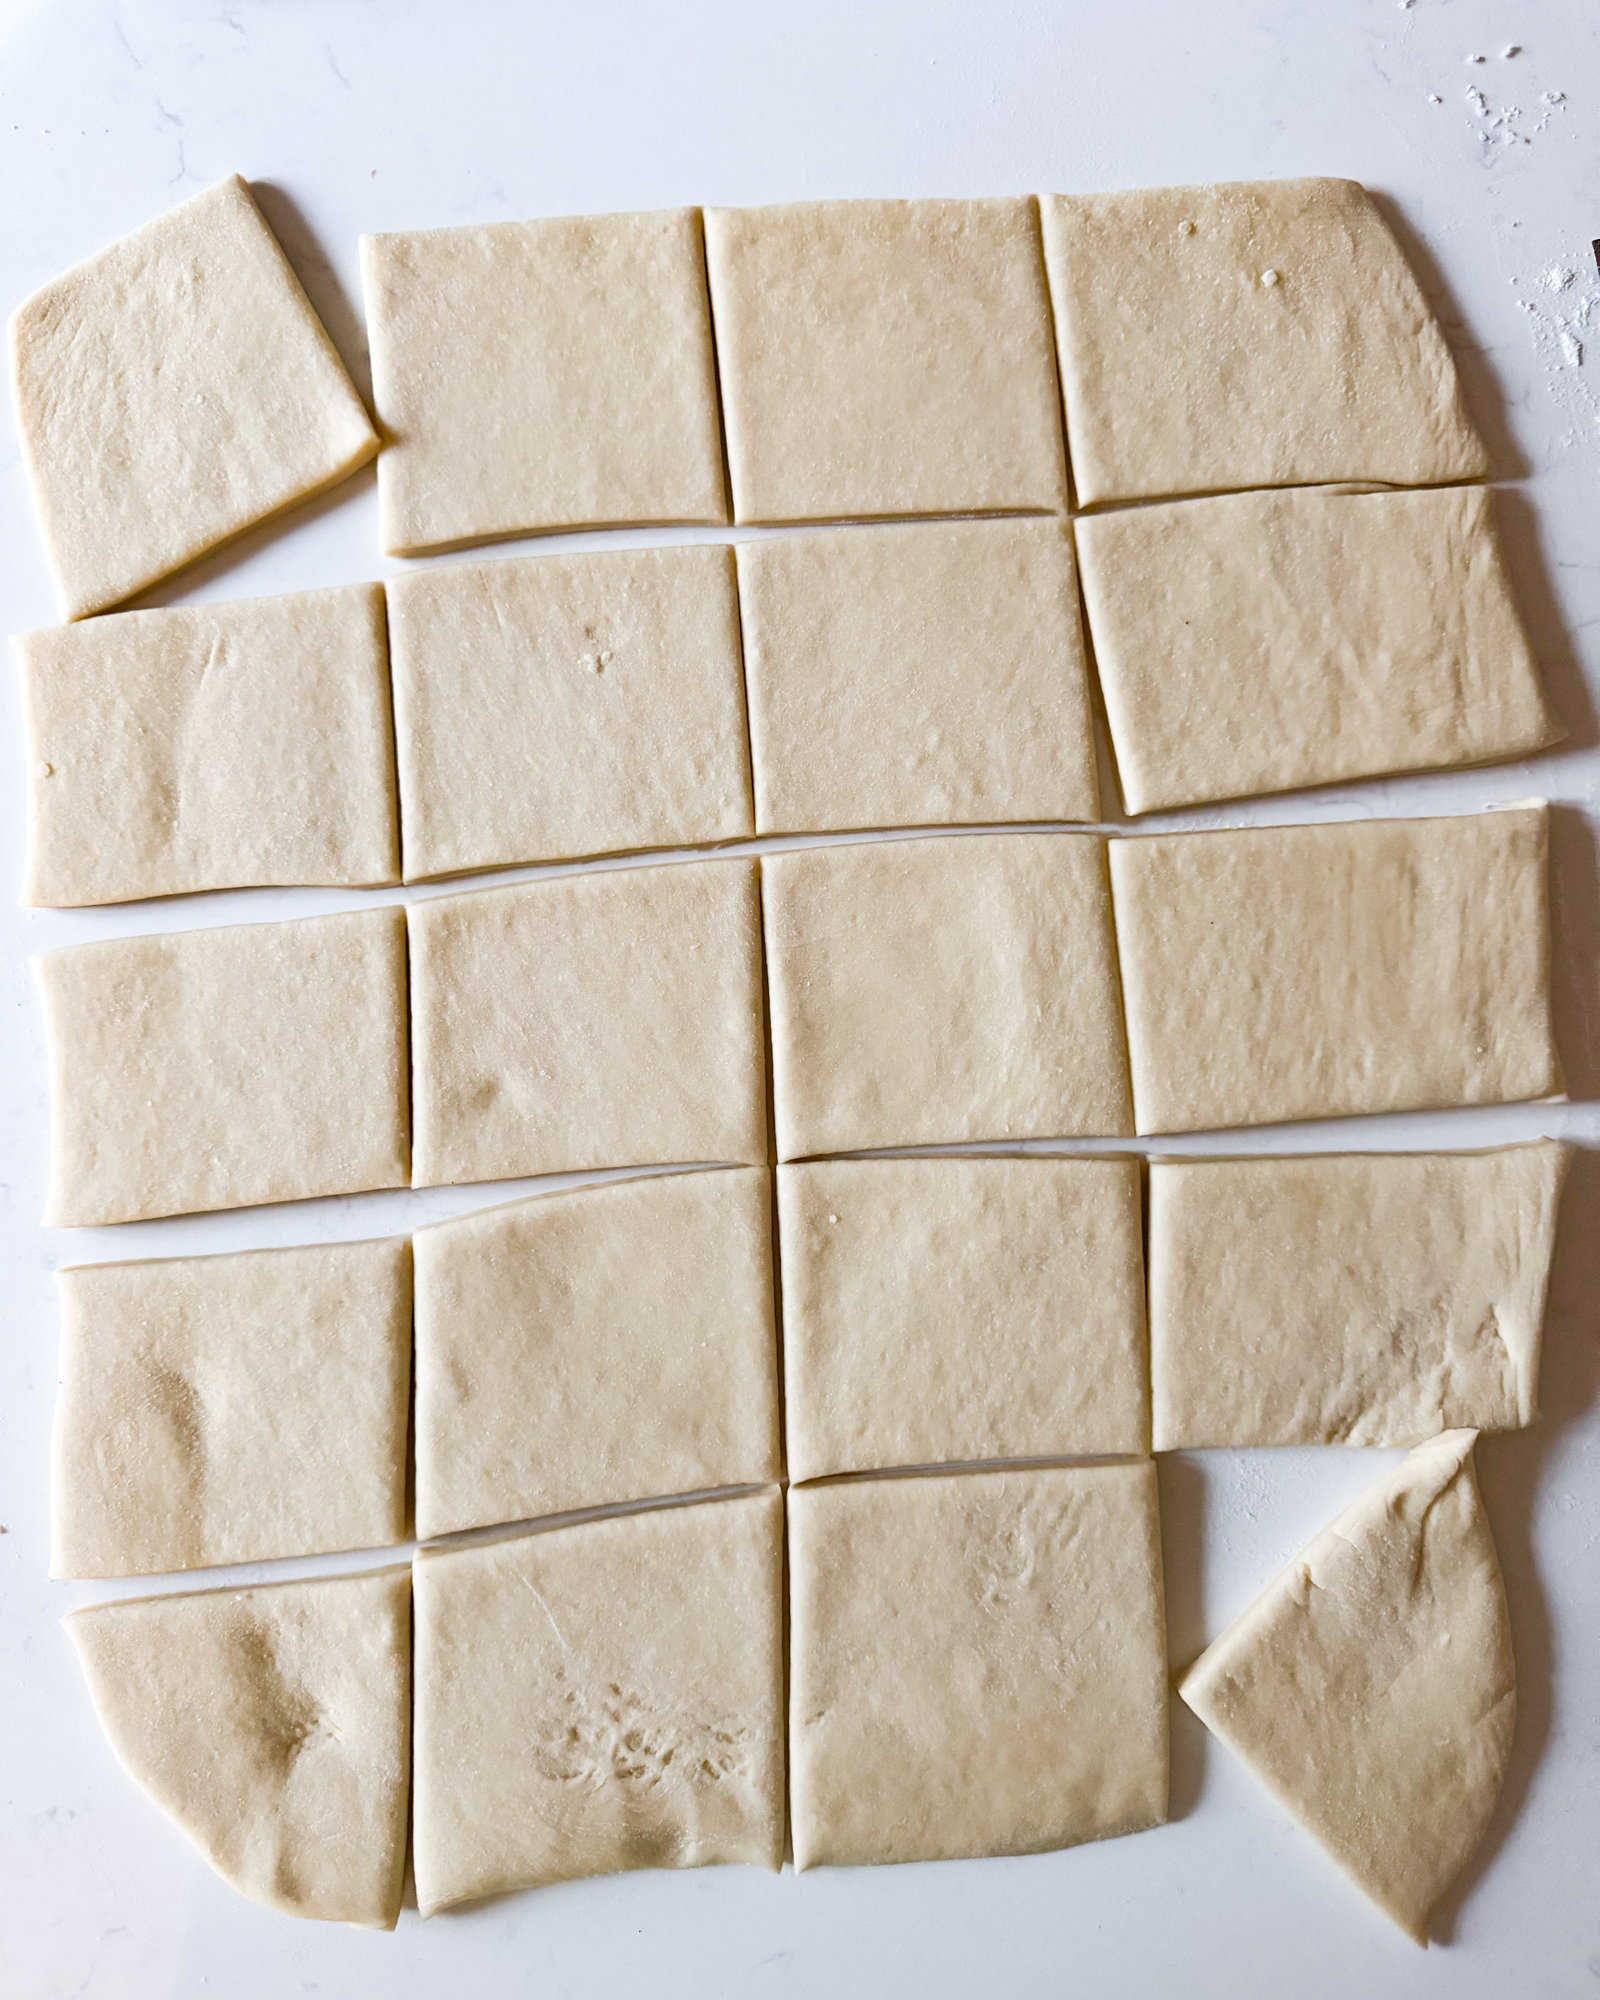 beignet dough cut into 3 inch squares on a white surface